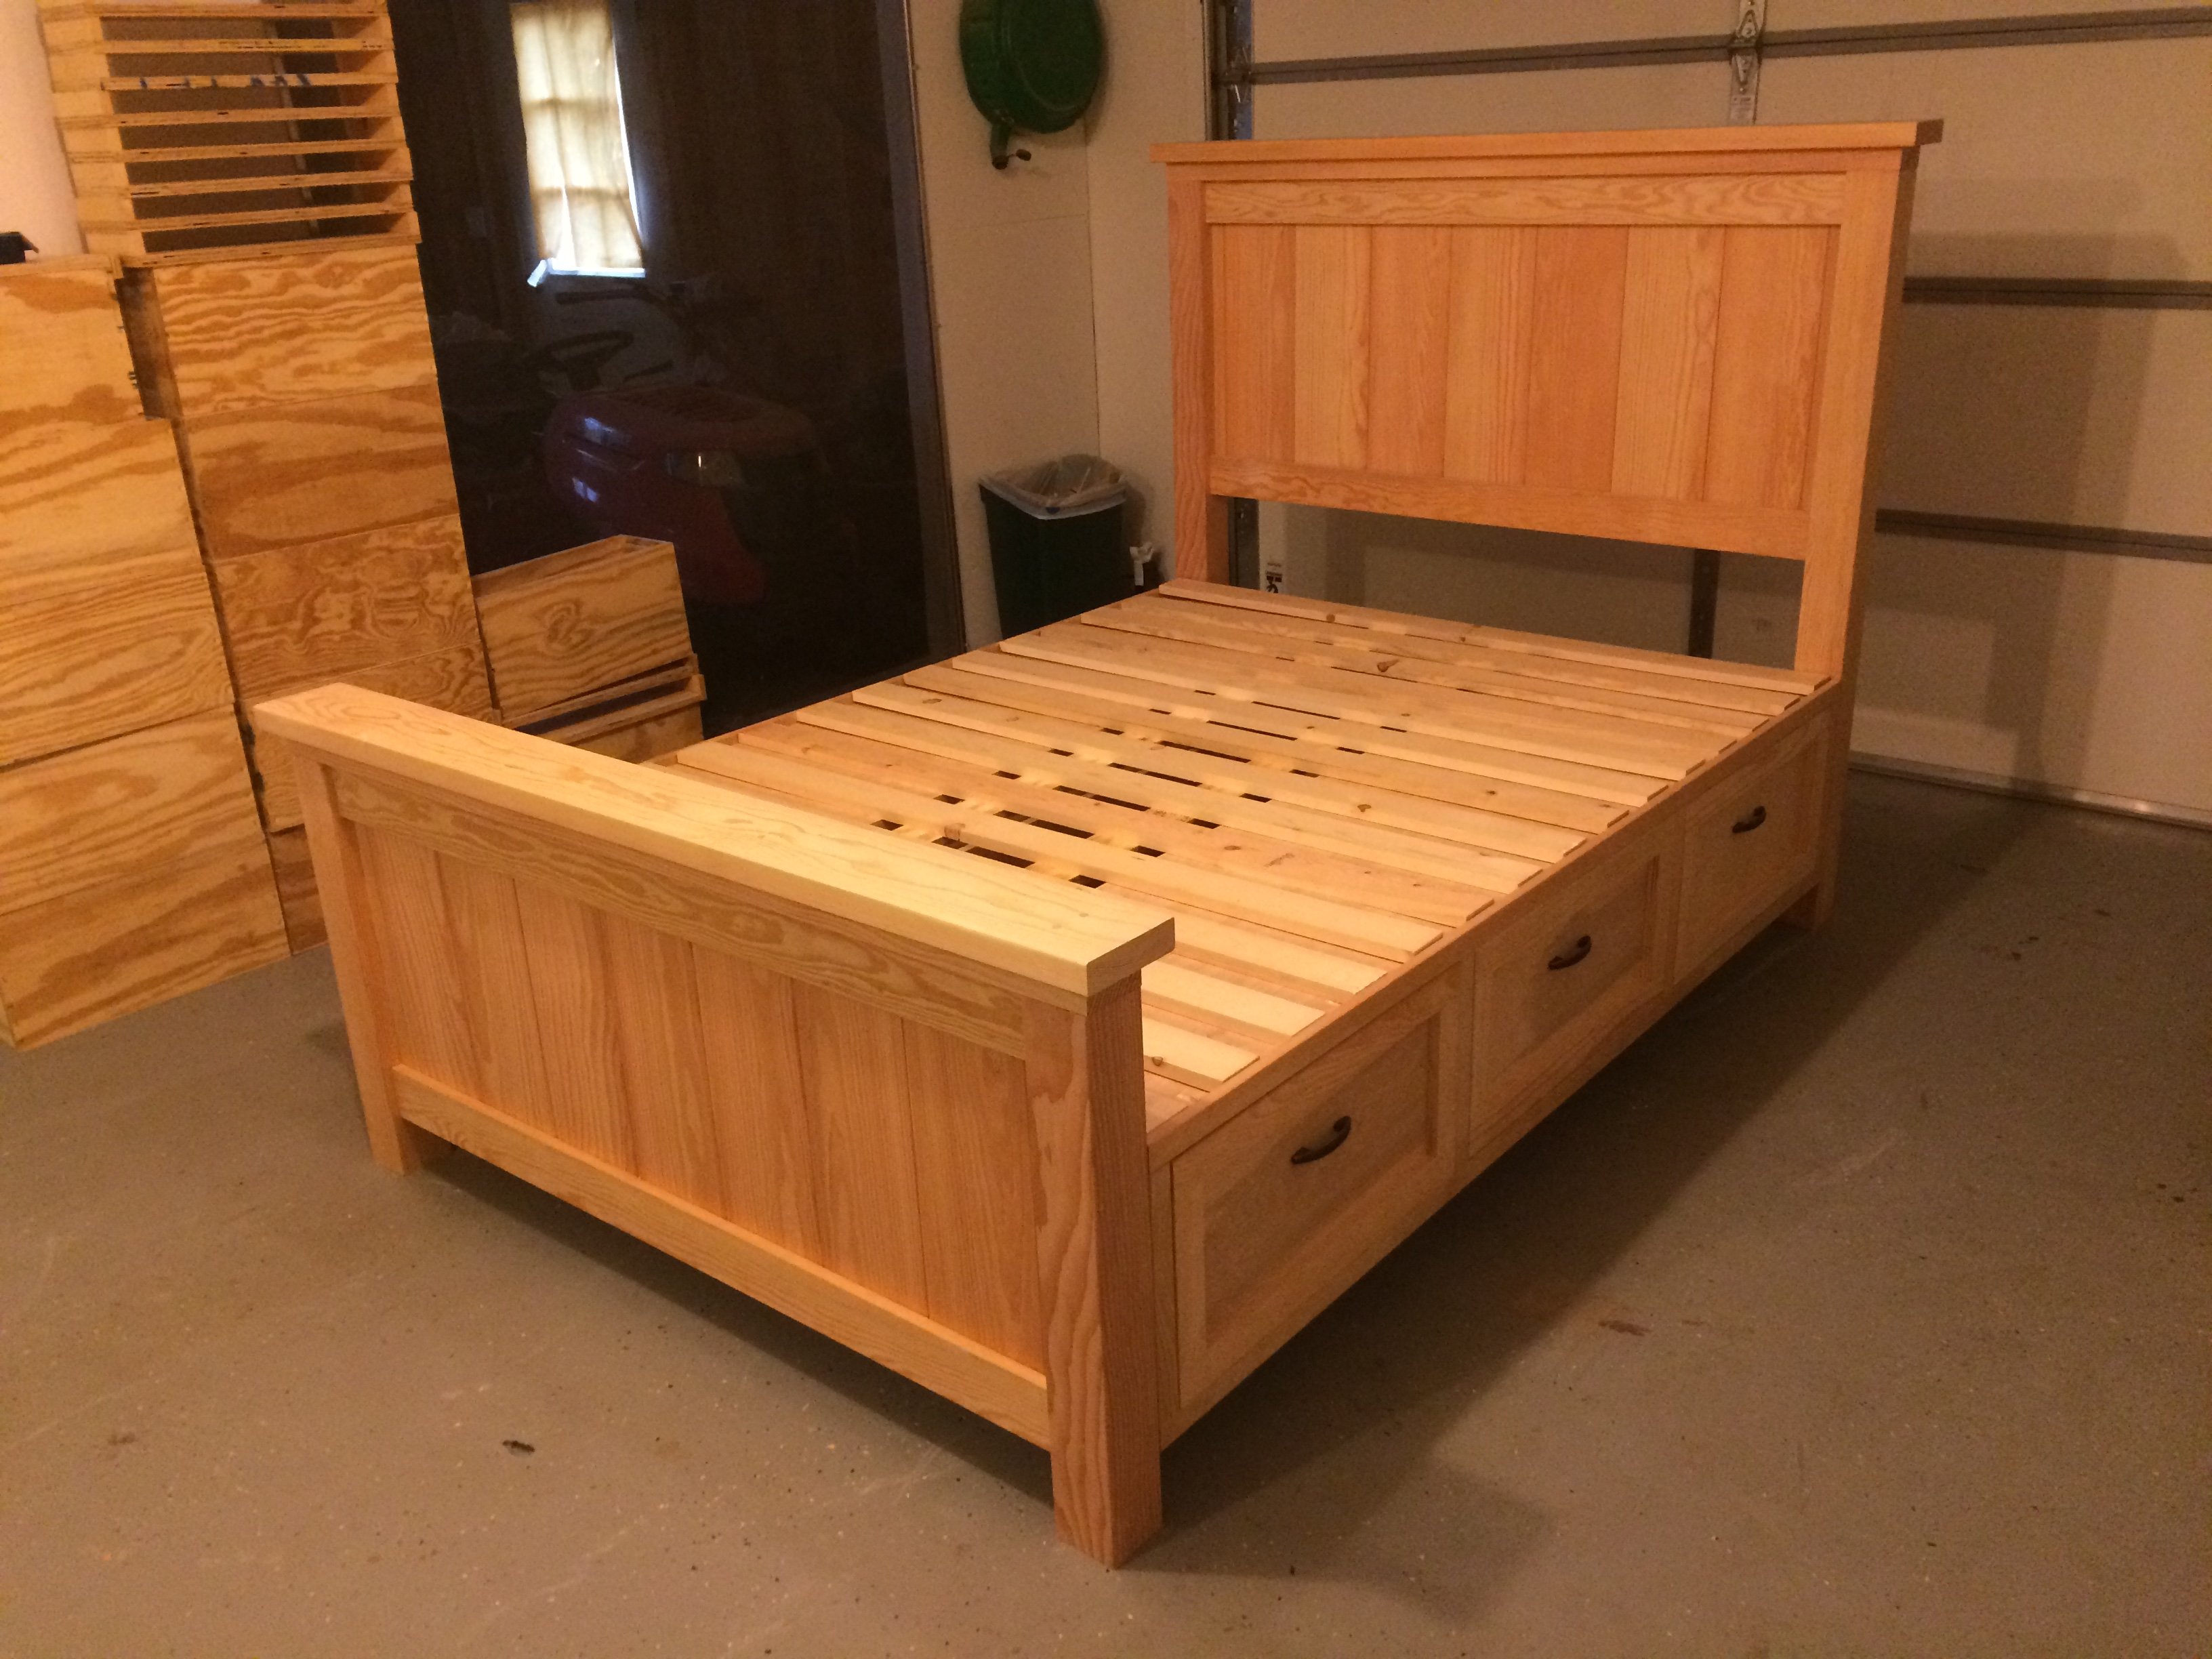 Farmhouse Storage Bed With Drawers, How To Build A Platform Bed With Storage Drawers Plans Pdf